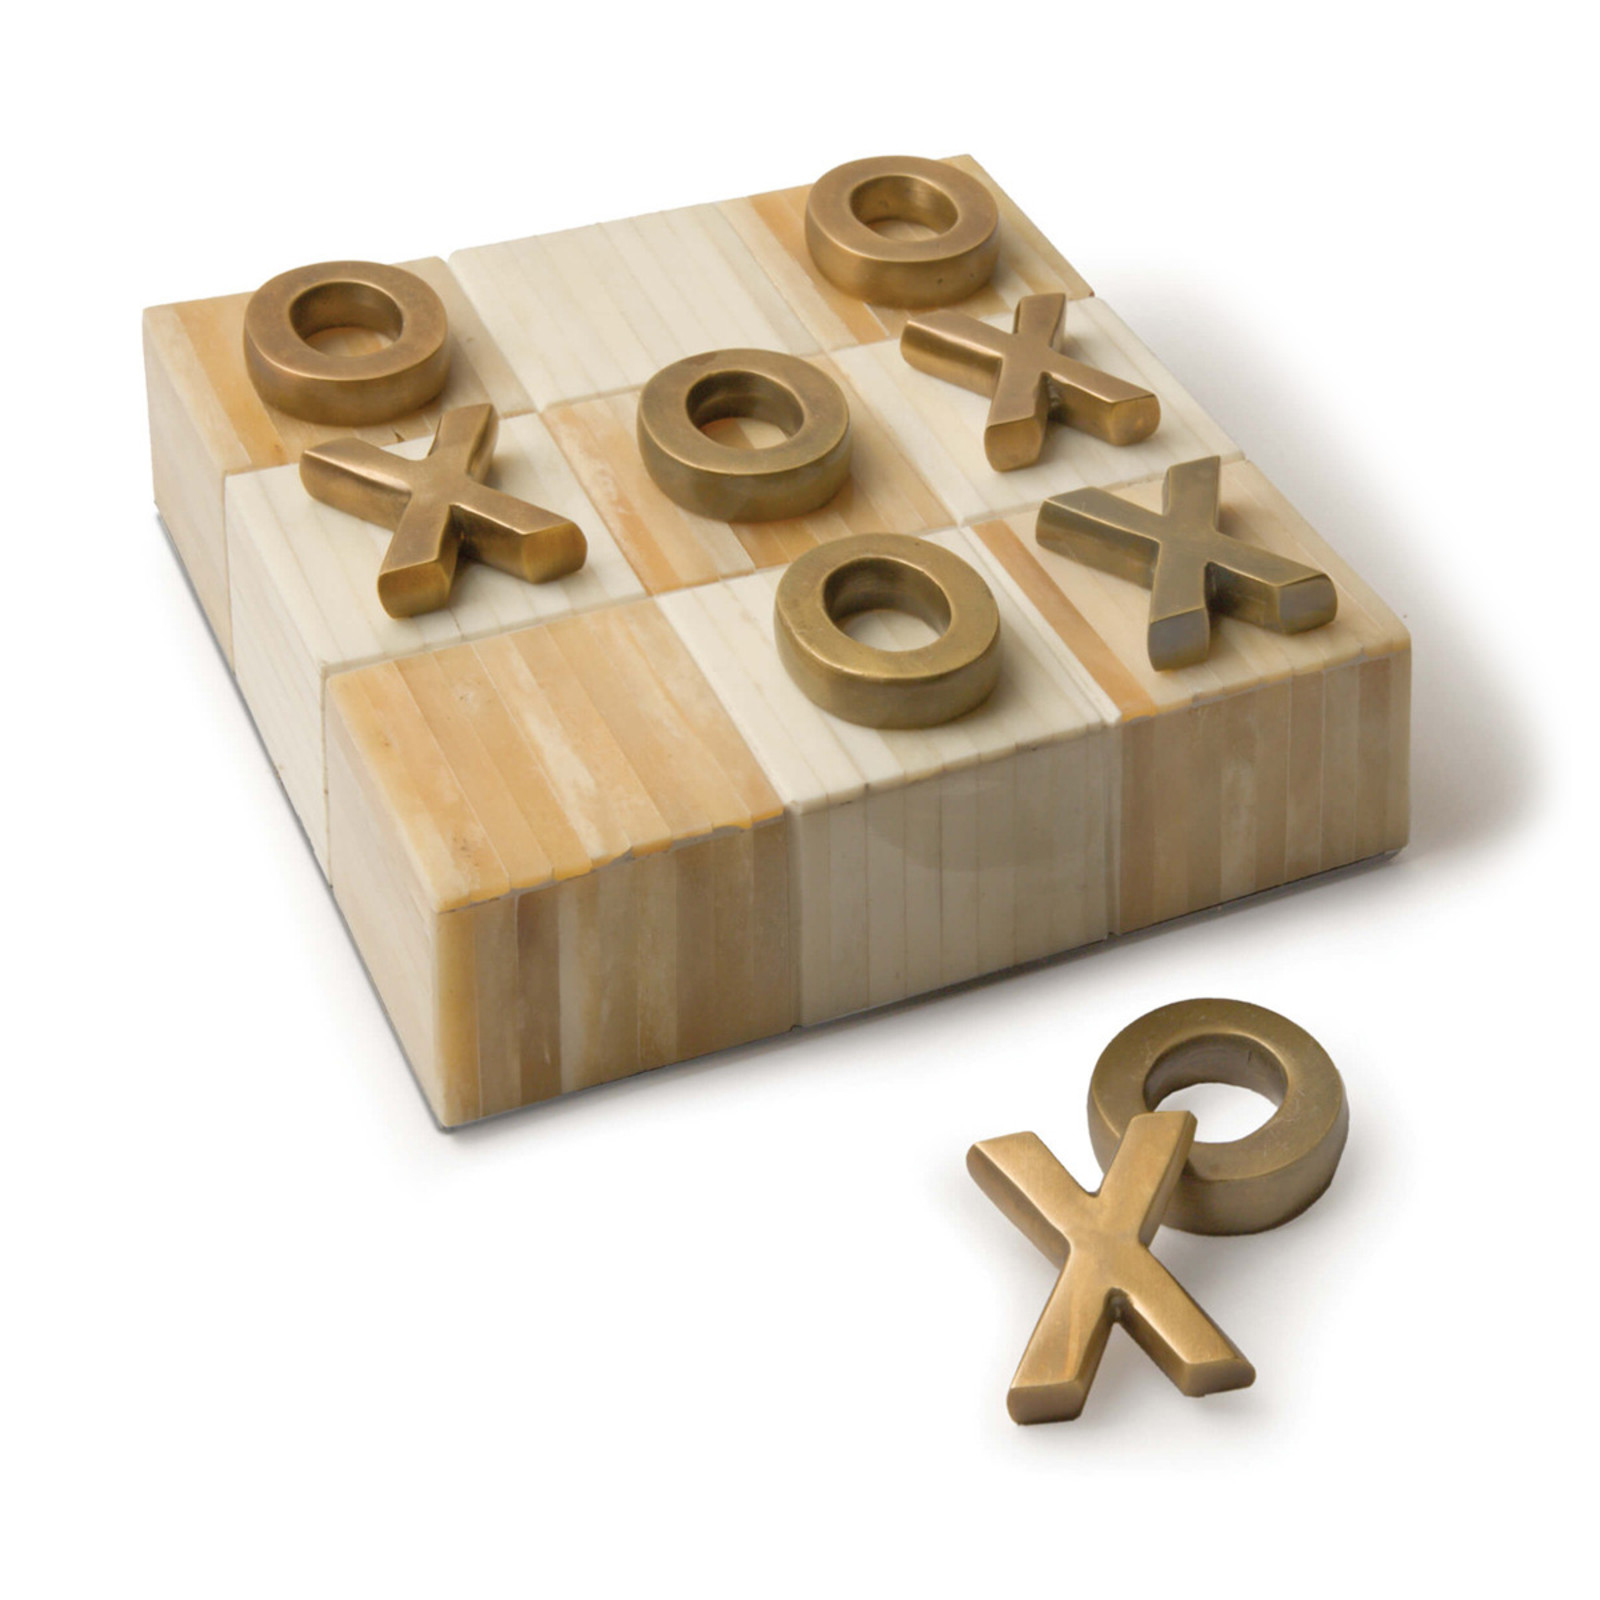 Natural textured Tic-Tac-Toe Board available at Charleston home decor store GDC Home